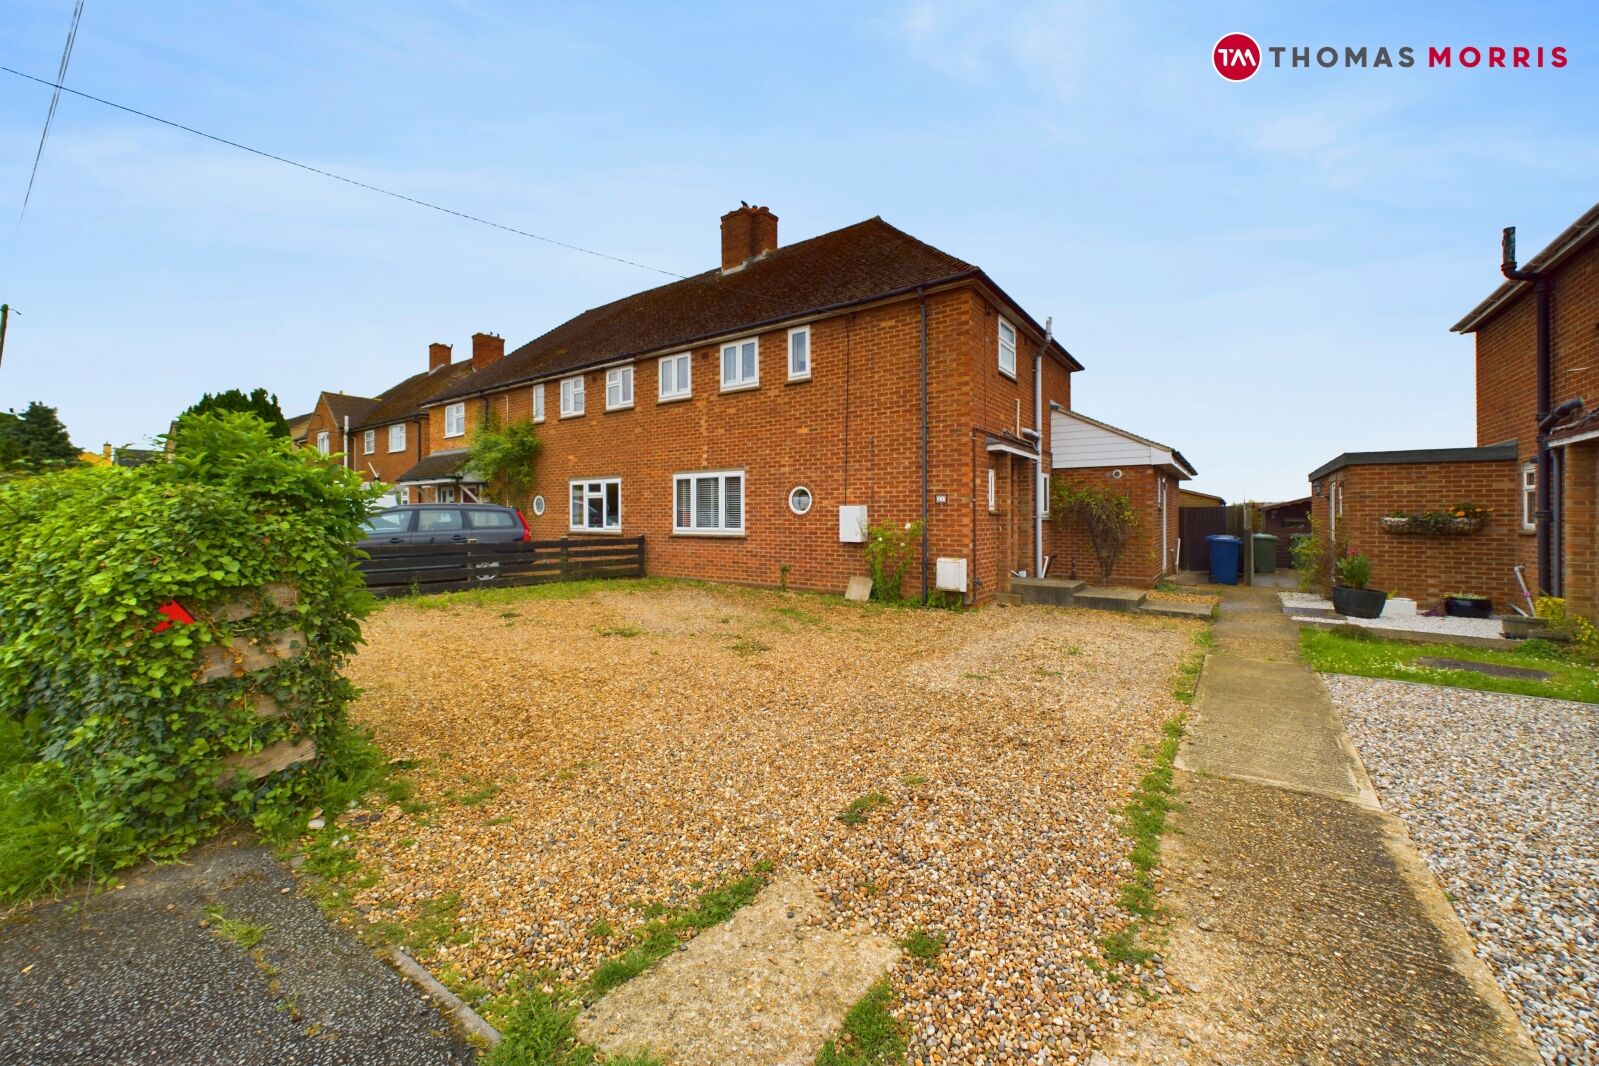 3 bedroom semi detached house for sale New Road, Cambridge, CB24, main image